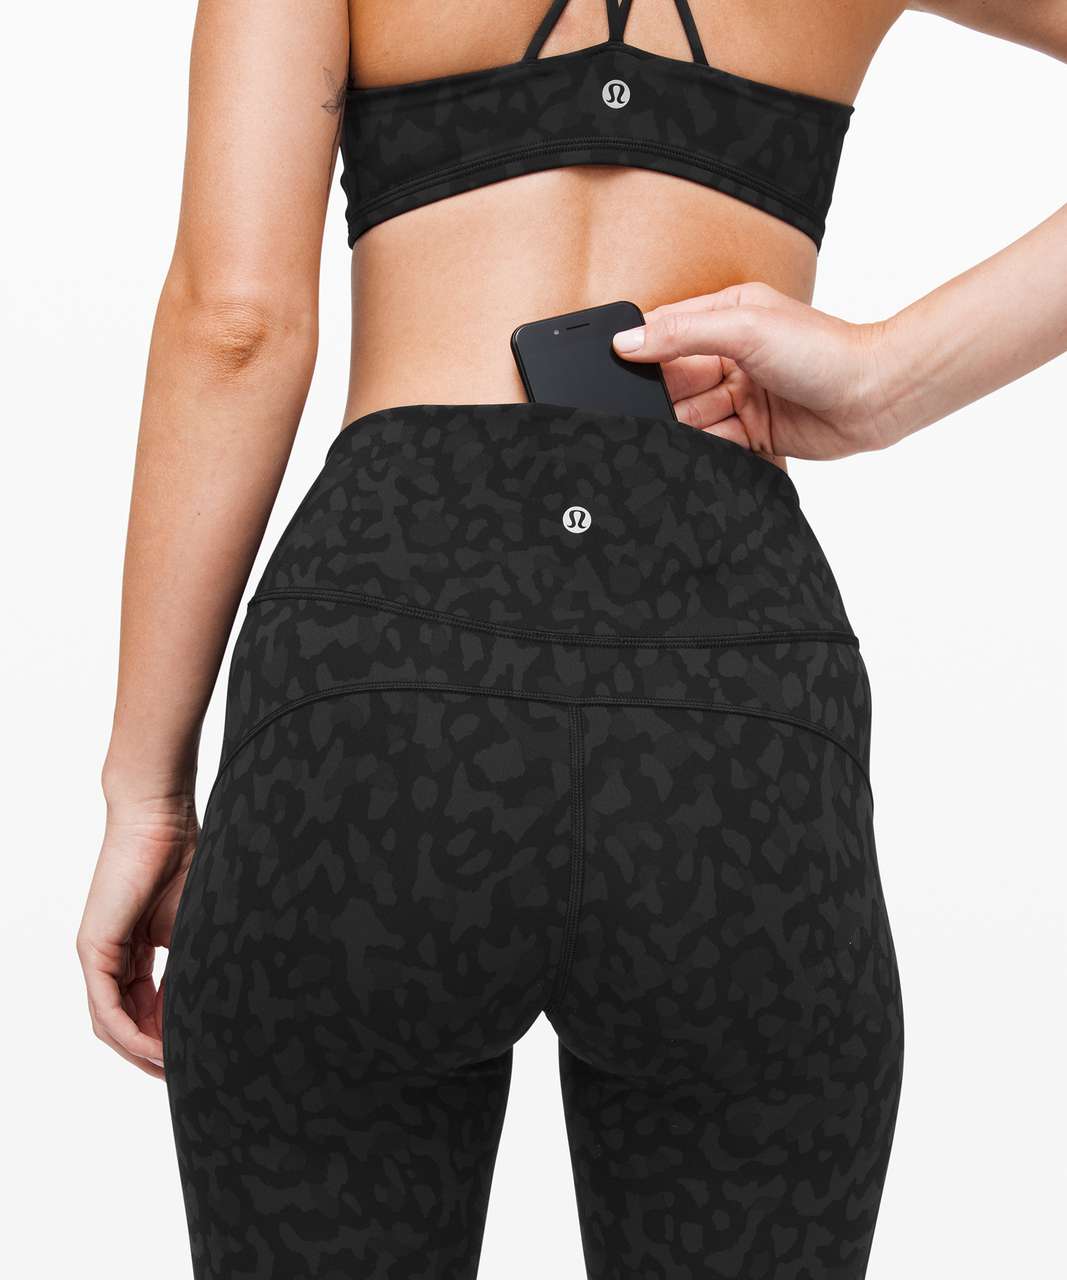 Lululemon formation camo deep coal multi in movement tight, size 2 (25)  (price reduced: was $58)